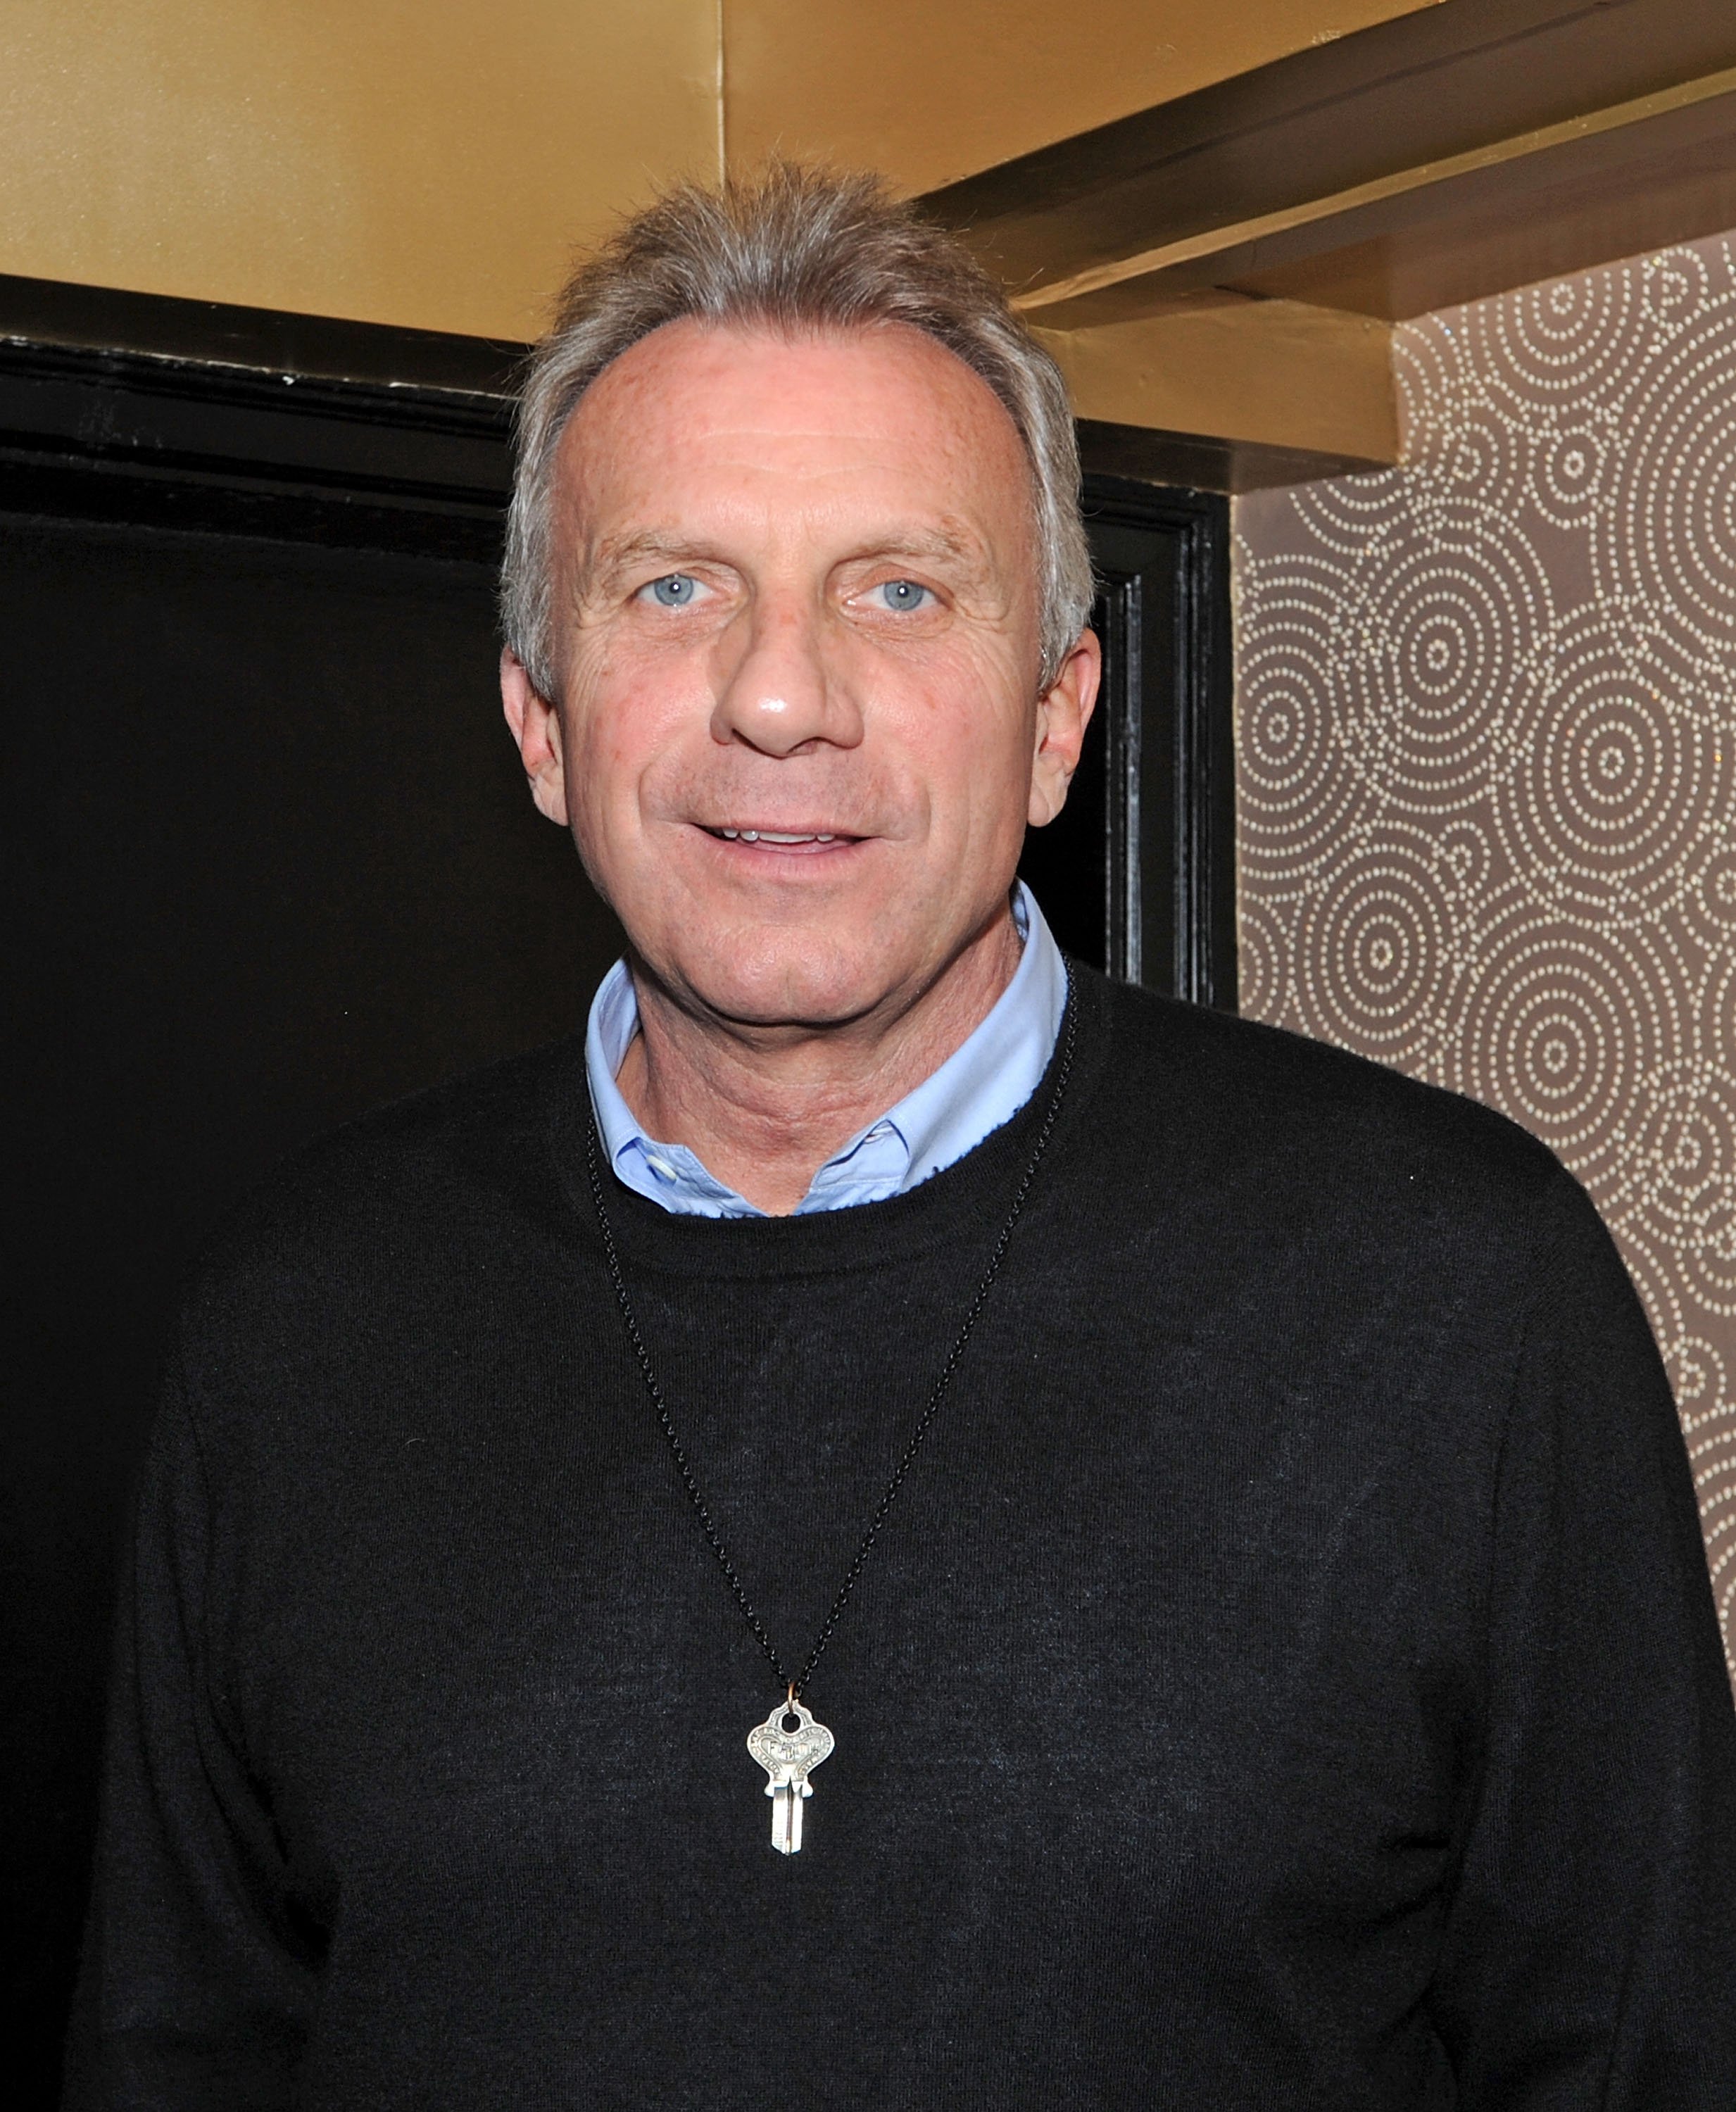 Former NFL quarterback Joe Montana at The Catch Game Day Experience at The Edison Ballroom in New York City | Photo: Bobby Bank/Getty Images